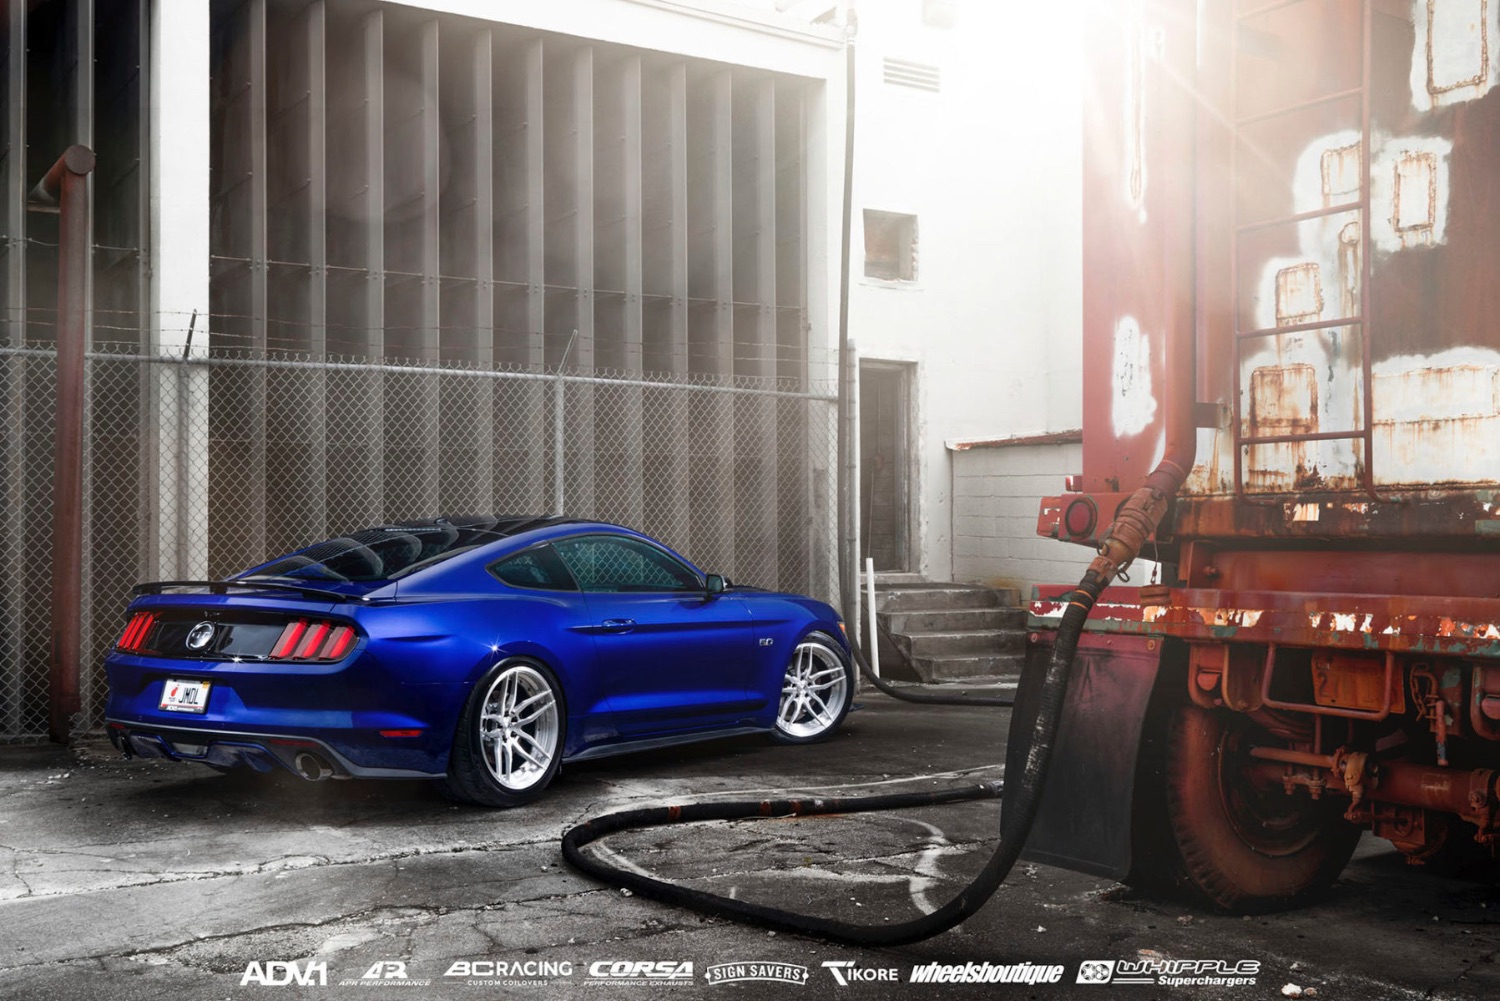 ford-mustang-5_0-whipple-supercharger-corsa-performance-exhaust-bc-racing-coilovers-nitto-tire-apr-splitter-adv1-wheels-california-modified-aftermarket-wallpaper-e